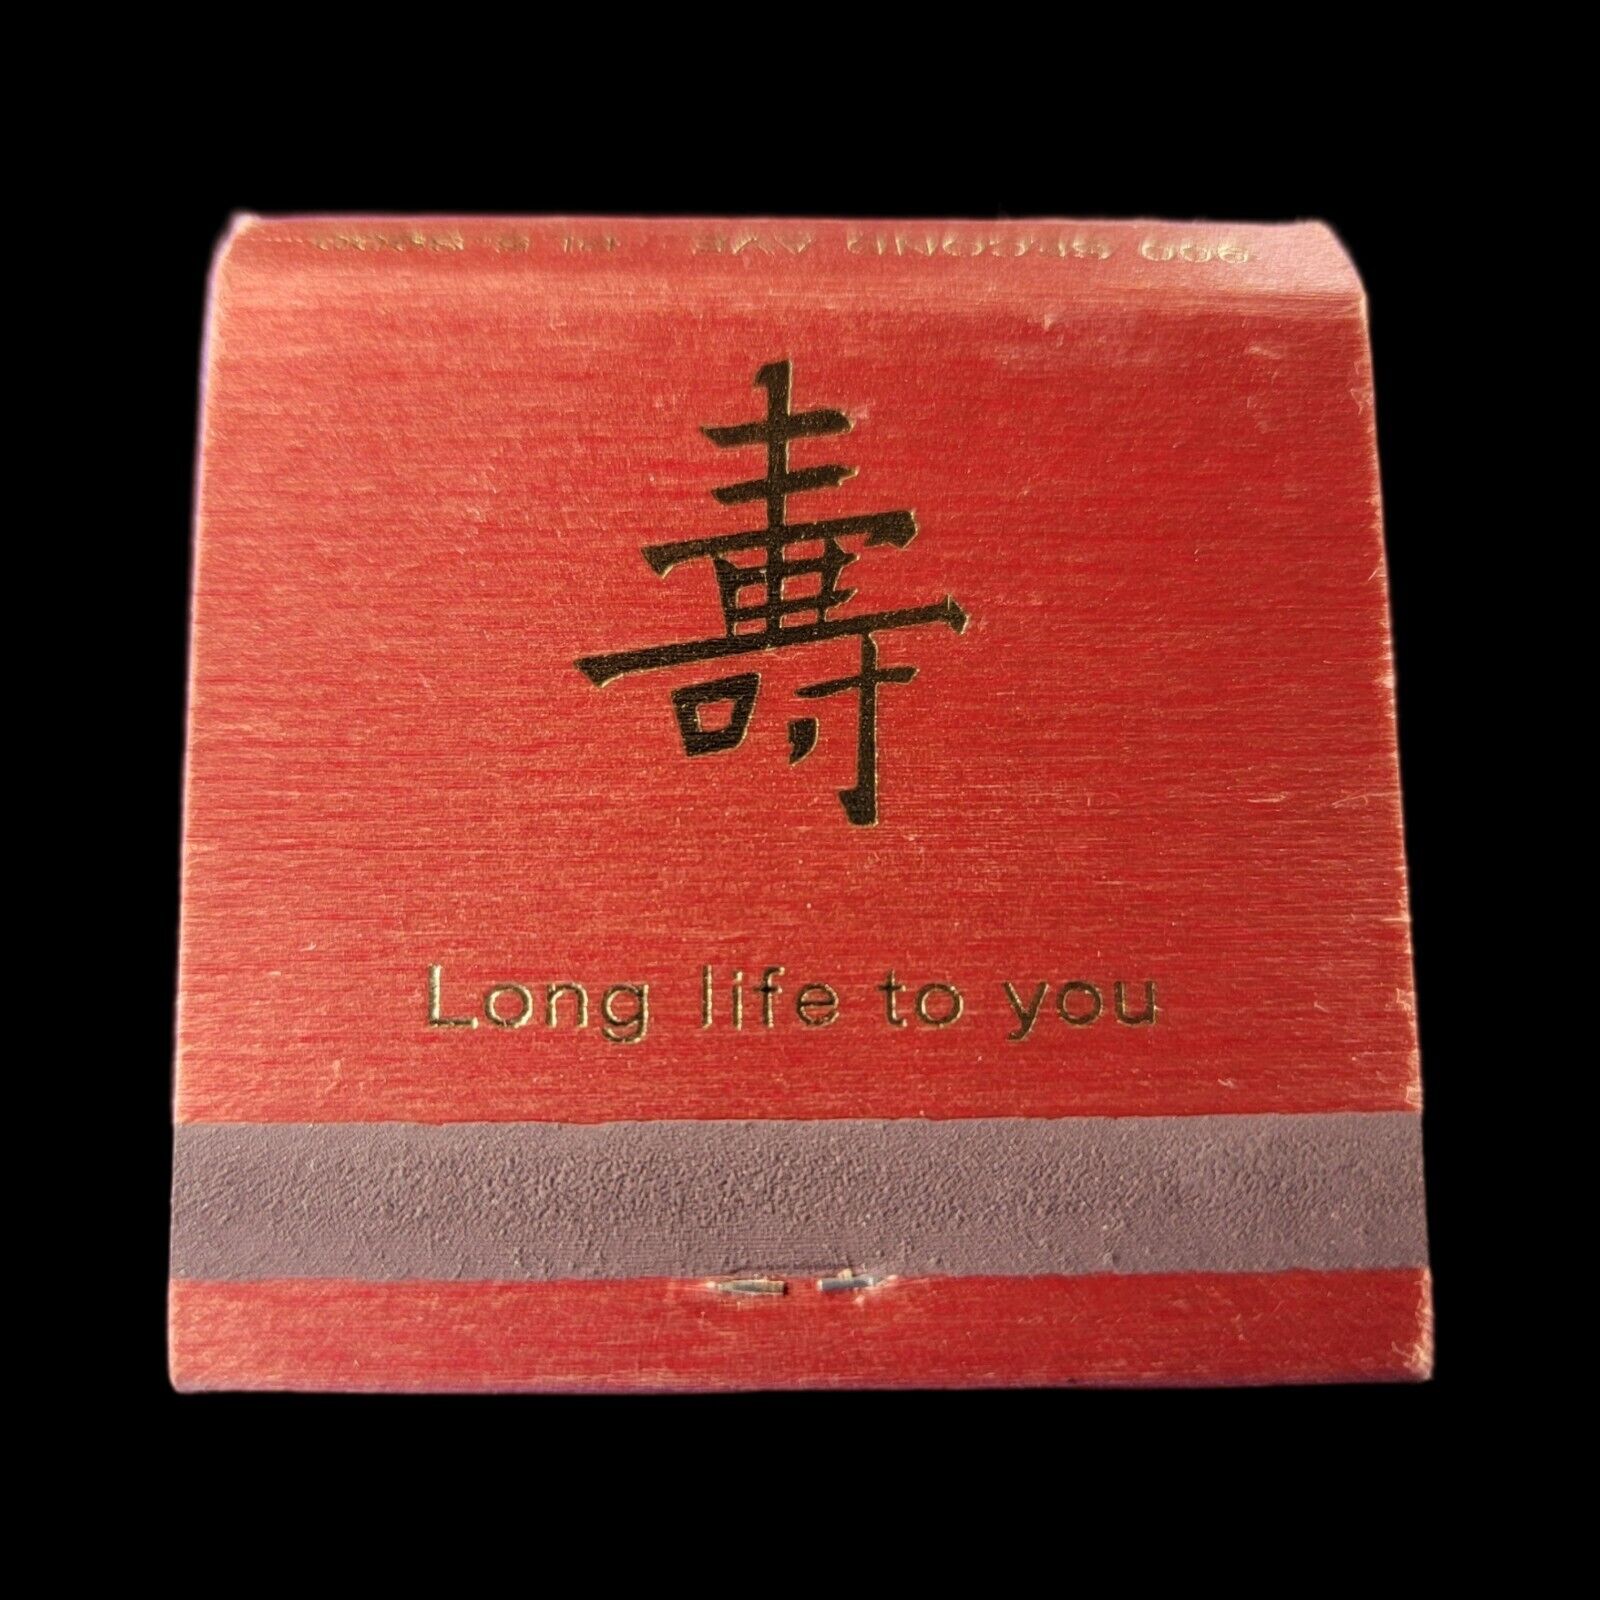 VINTAGE MATCHBOOK NEW YORK CITY 900 SECOND AVE. SHUN LEE DYNASTY LONG LIFE TO U